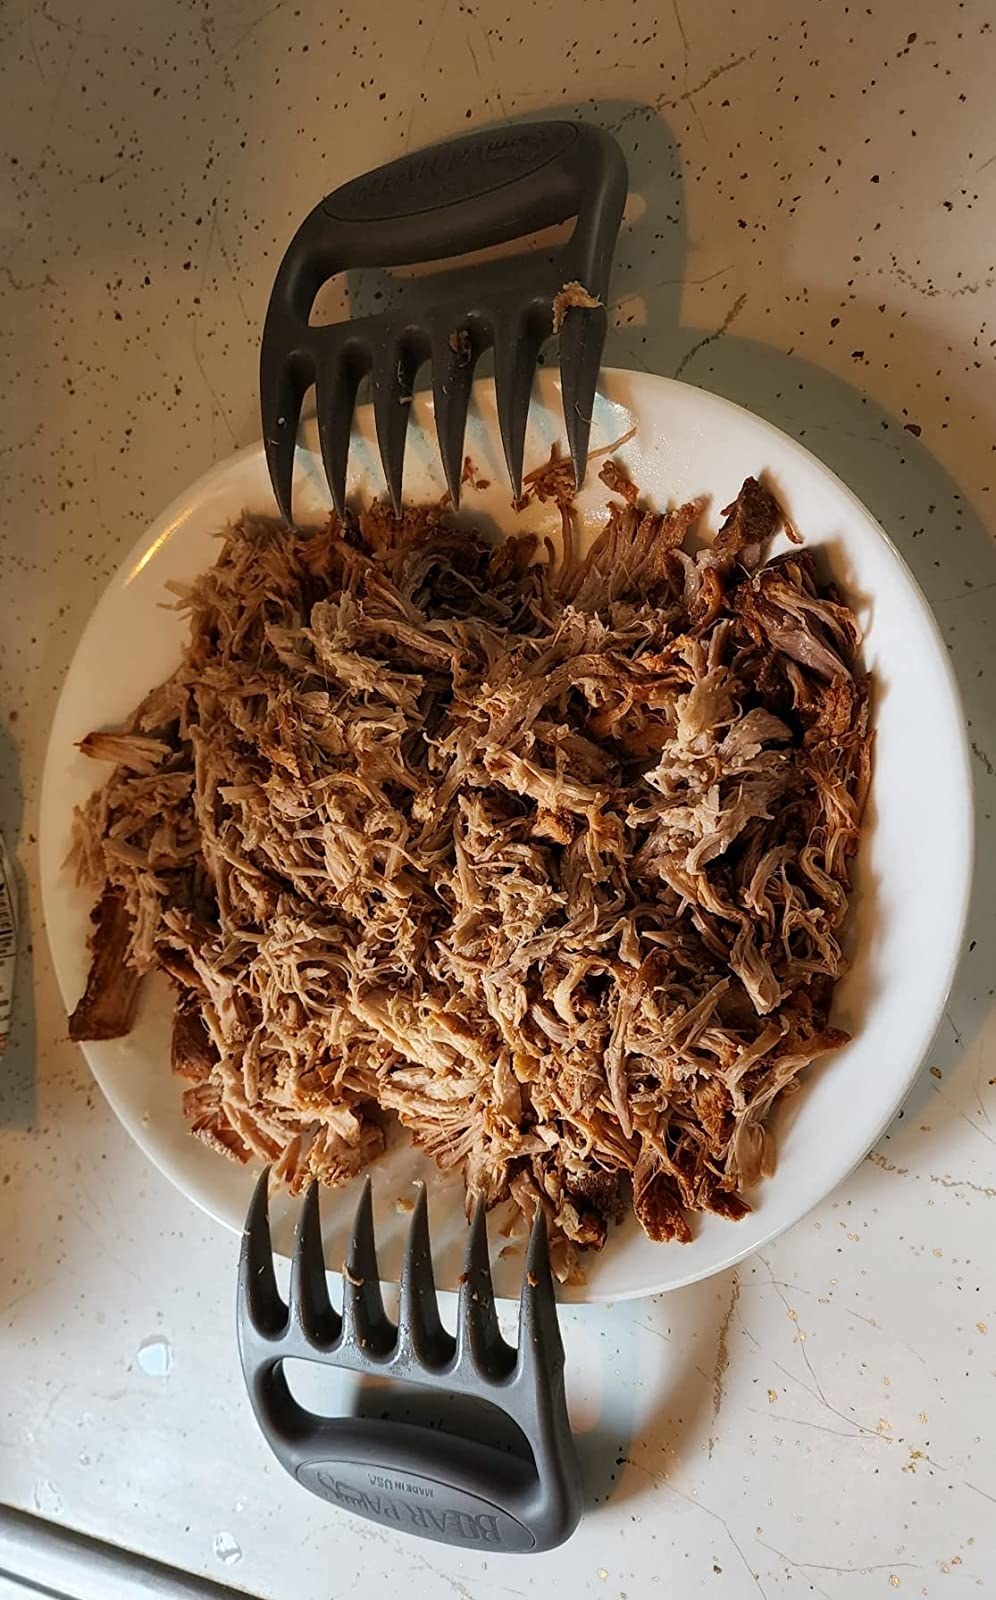 Reviewer image of a plate of shredded meat and claws next to it